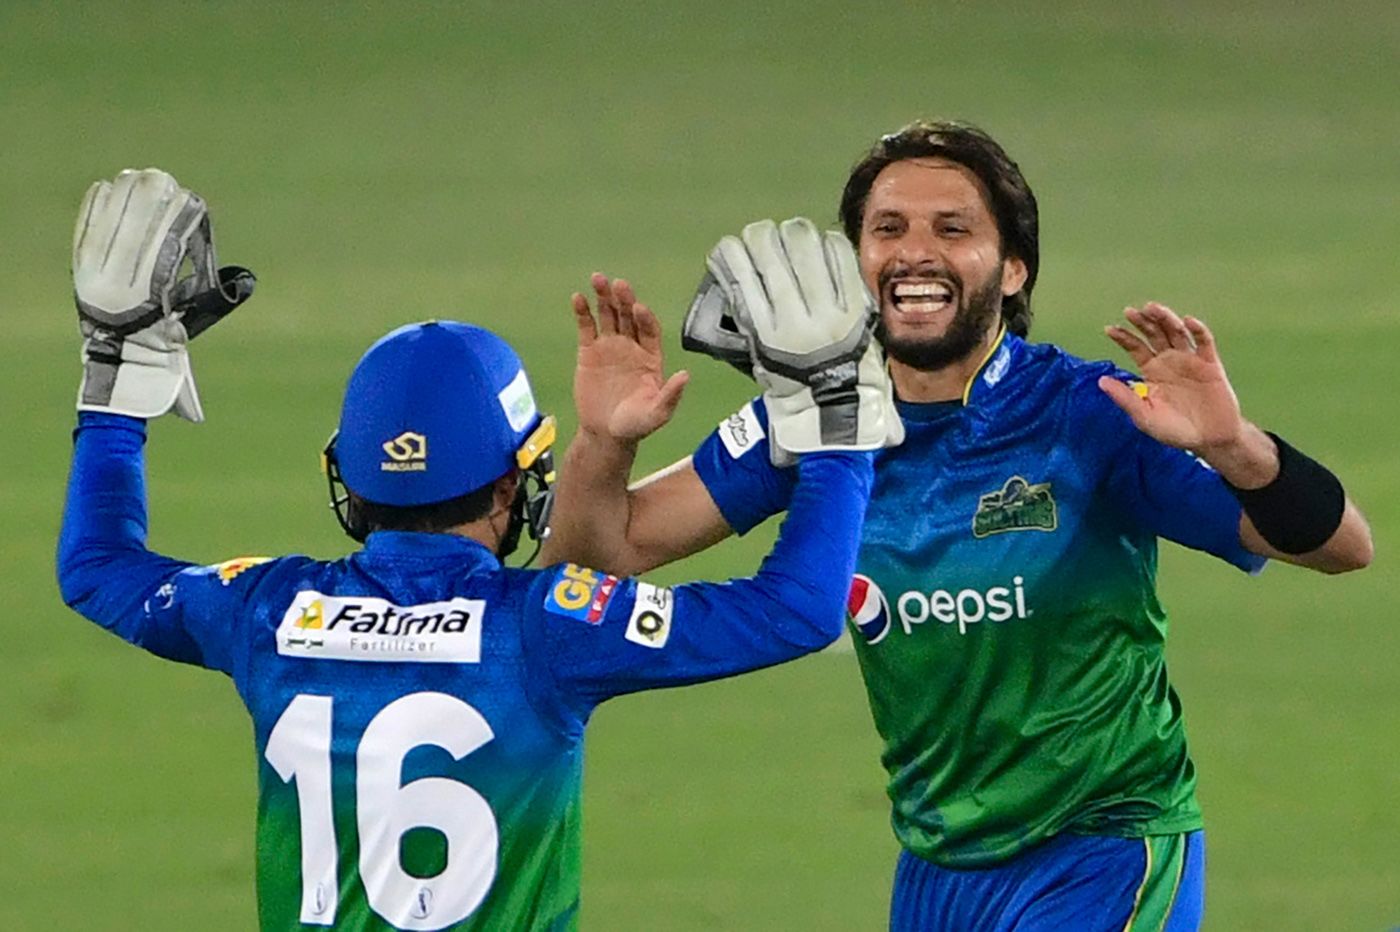 Shahid Afridi ODI photos and editorial news pictures from ESPNcricinfo  Images